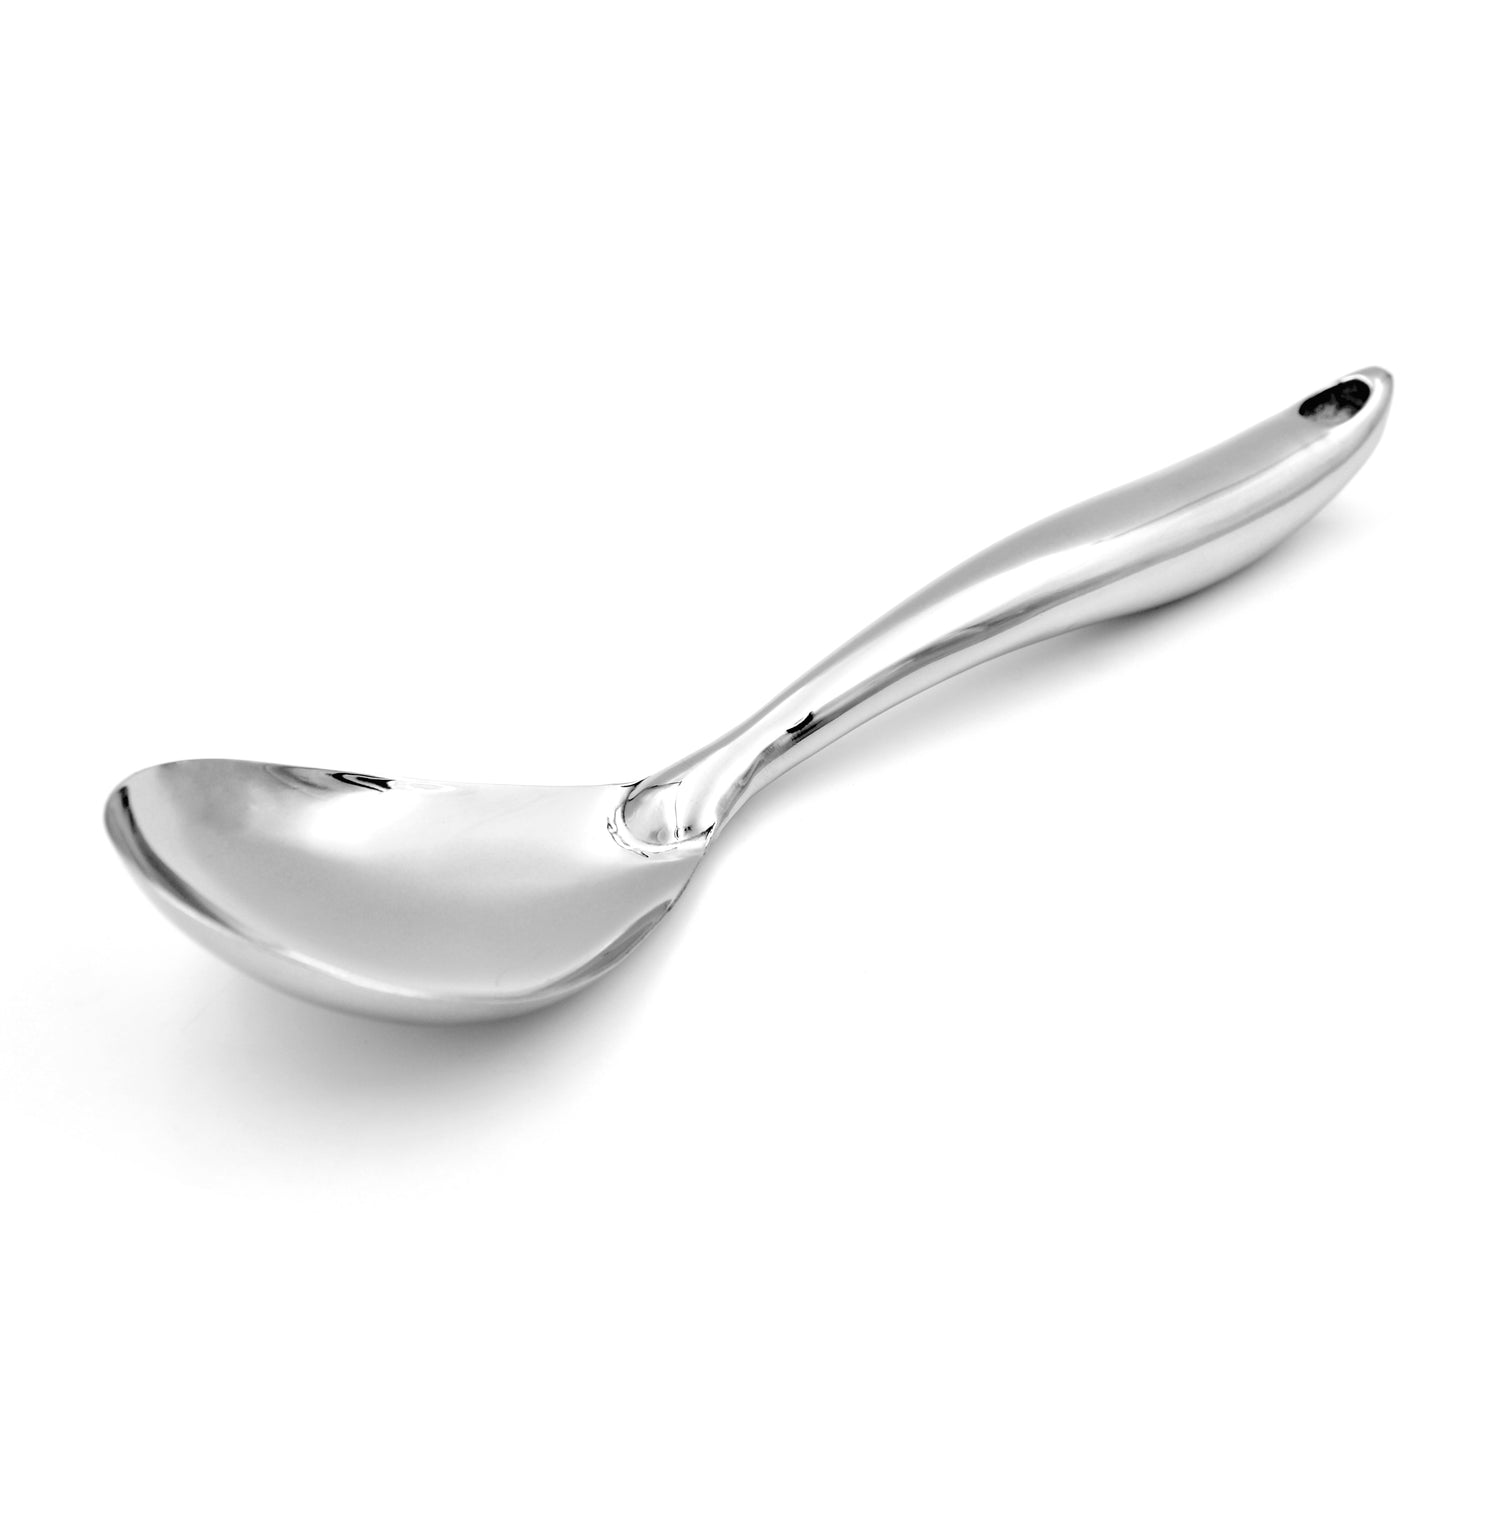 Large rice serving spoon